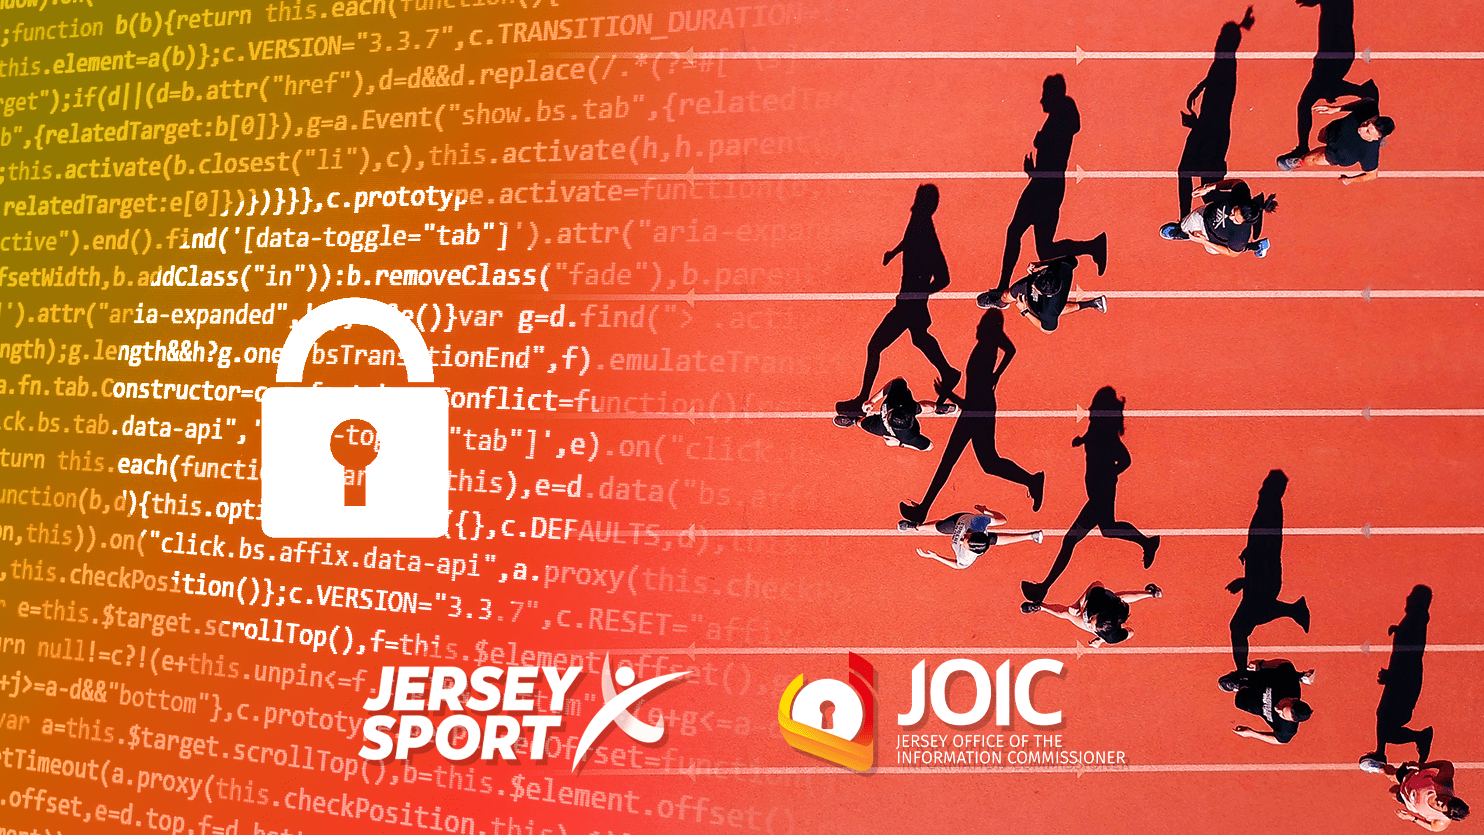 JOIC sport event